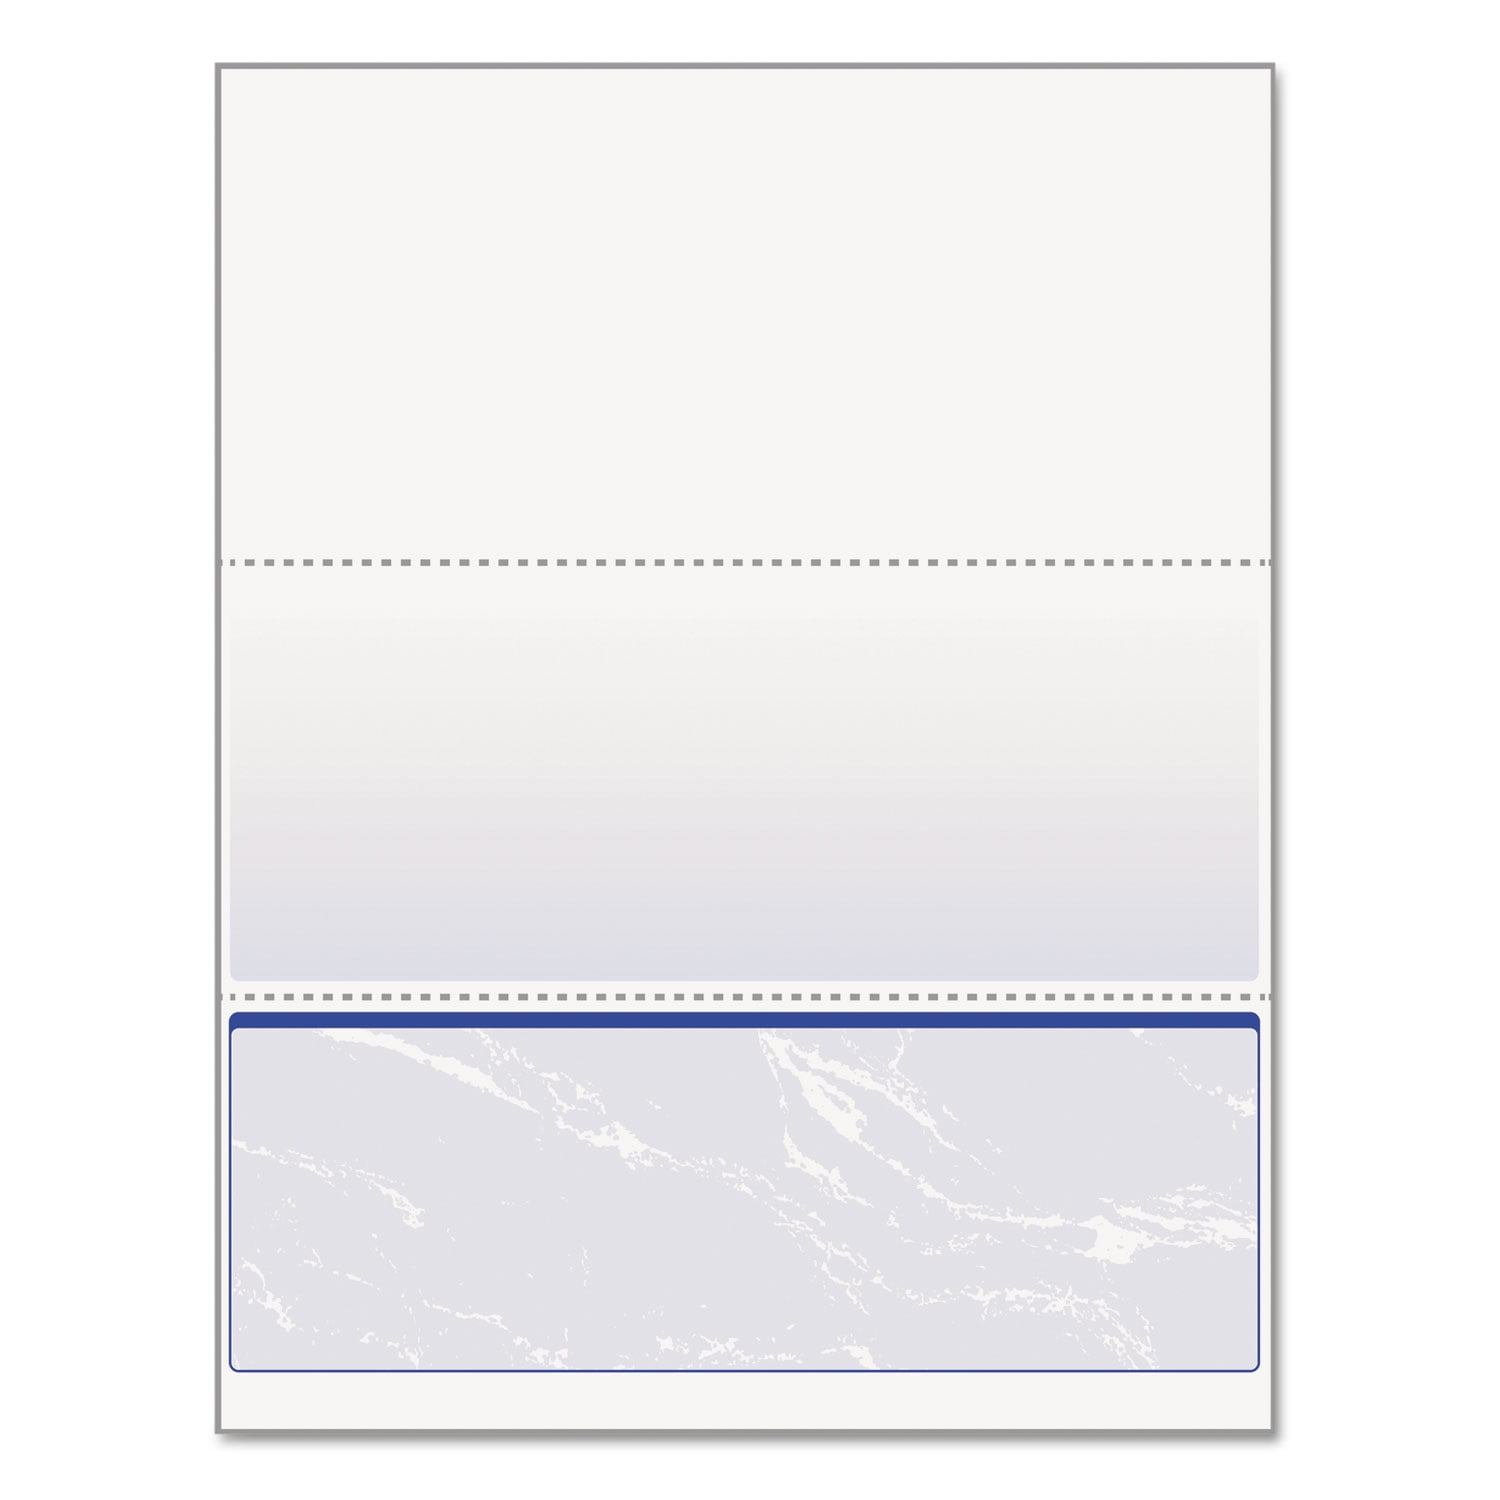 Docugard 04517 Security Business Checks Marble Bottom Blue 500 Sheets 